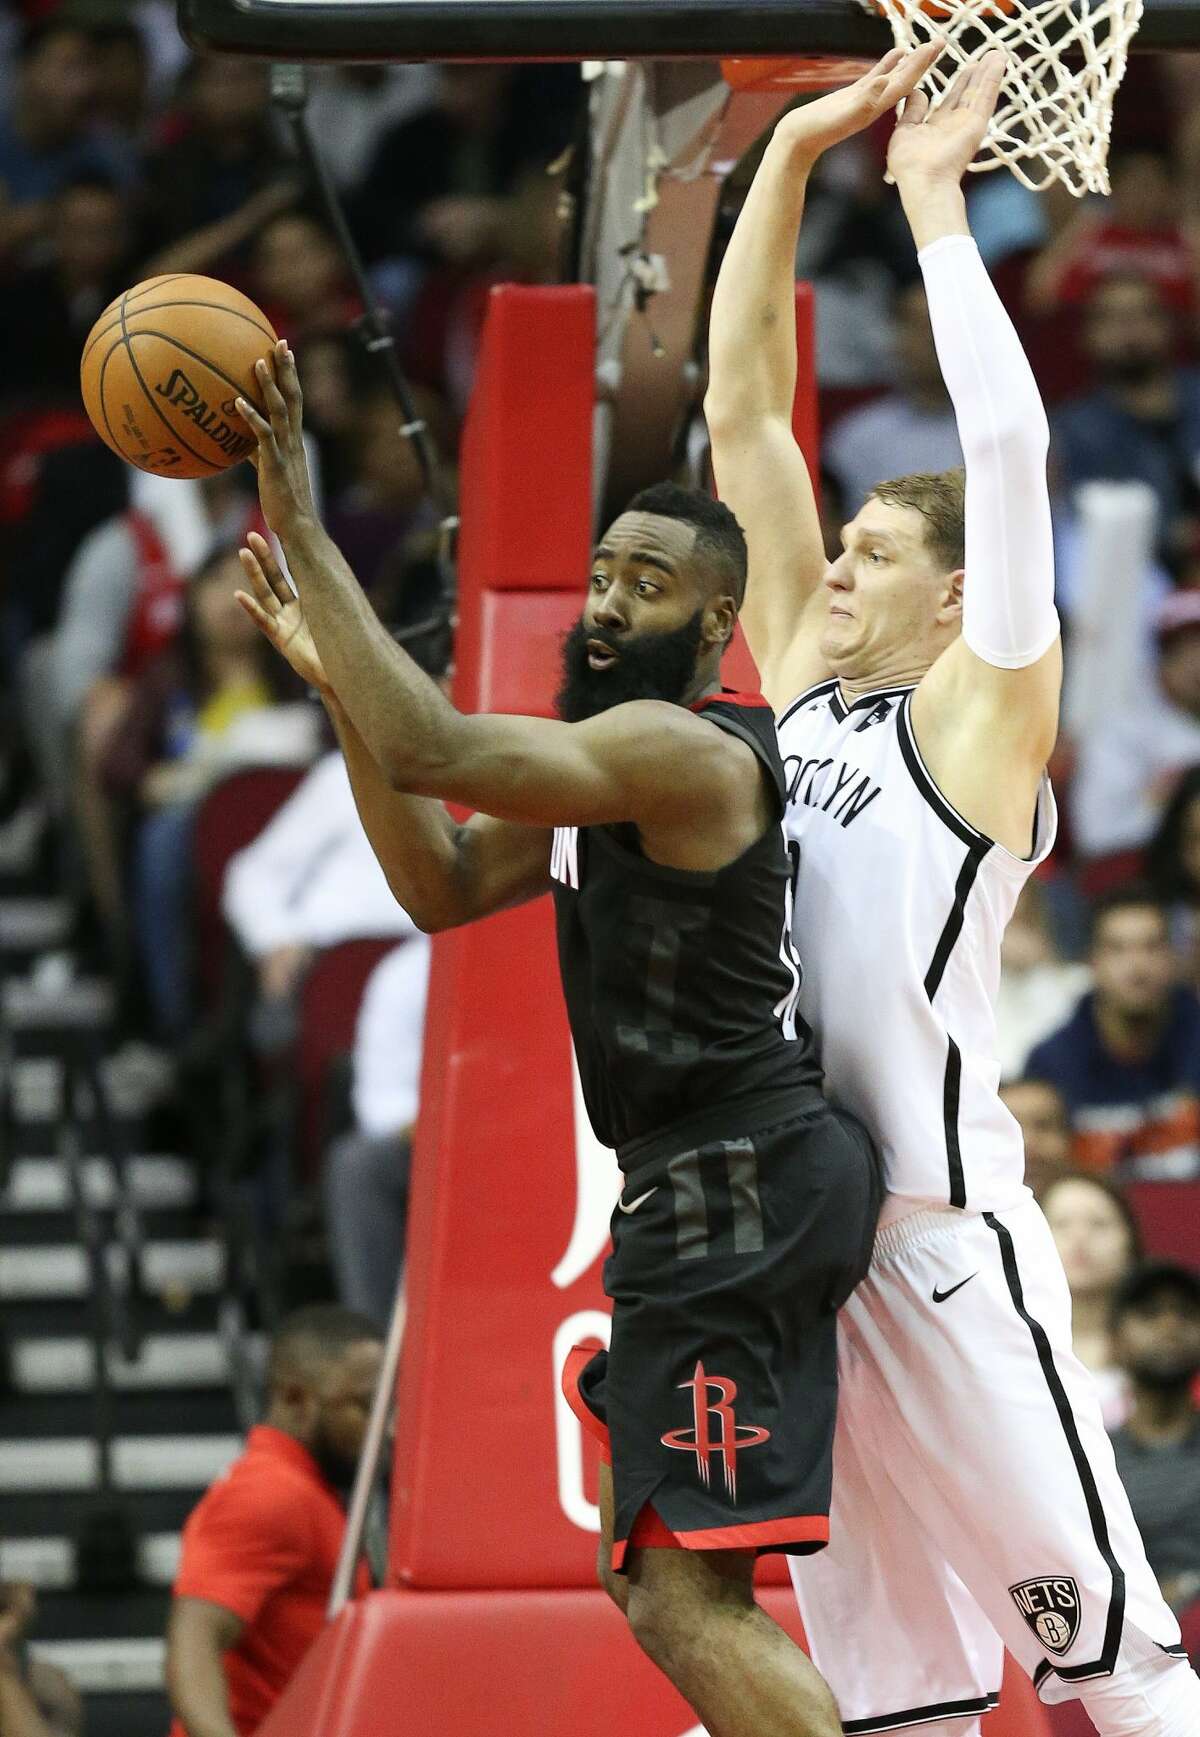 Houston Rockets guard James Harden, left, passes the ball as Brooklyn Nets center Timofey Mozgov defends during the second half of an NBA basketball game, Monday, Nov. 27, 2017, in Houston. Houston won the game 117-103. (AP Photo/Eric Christian Smith)